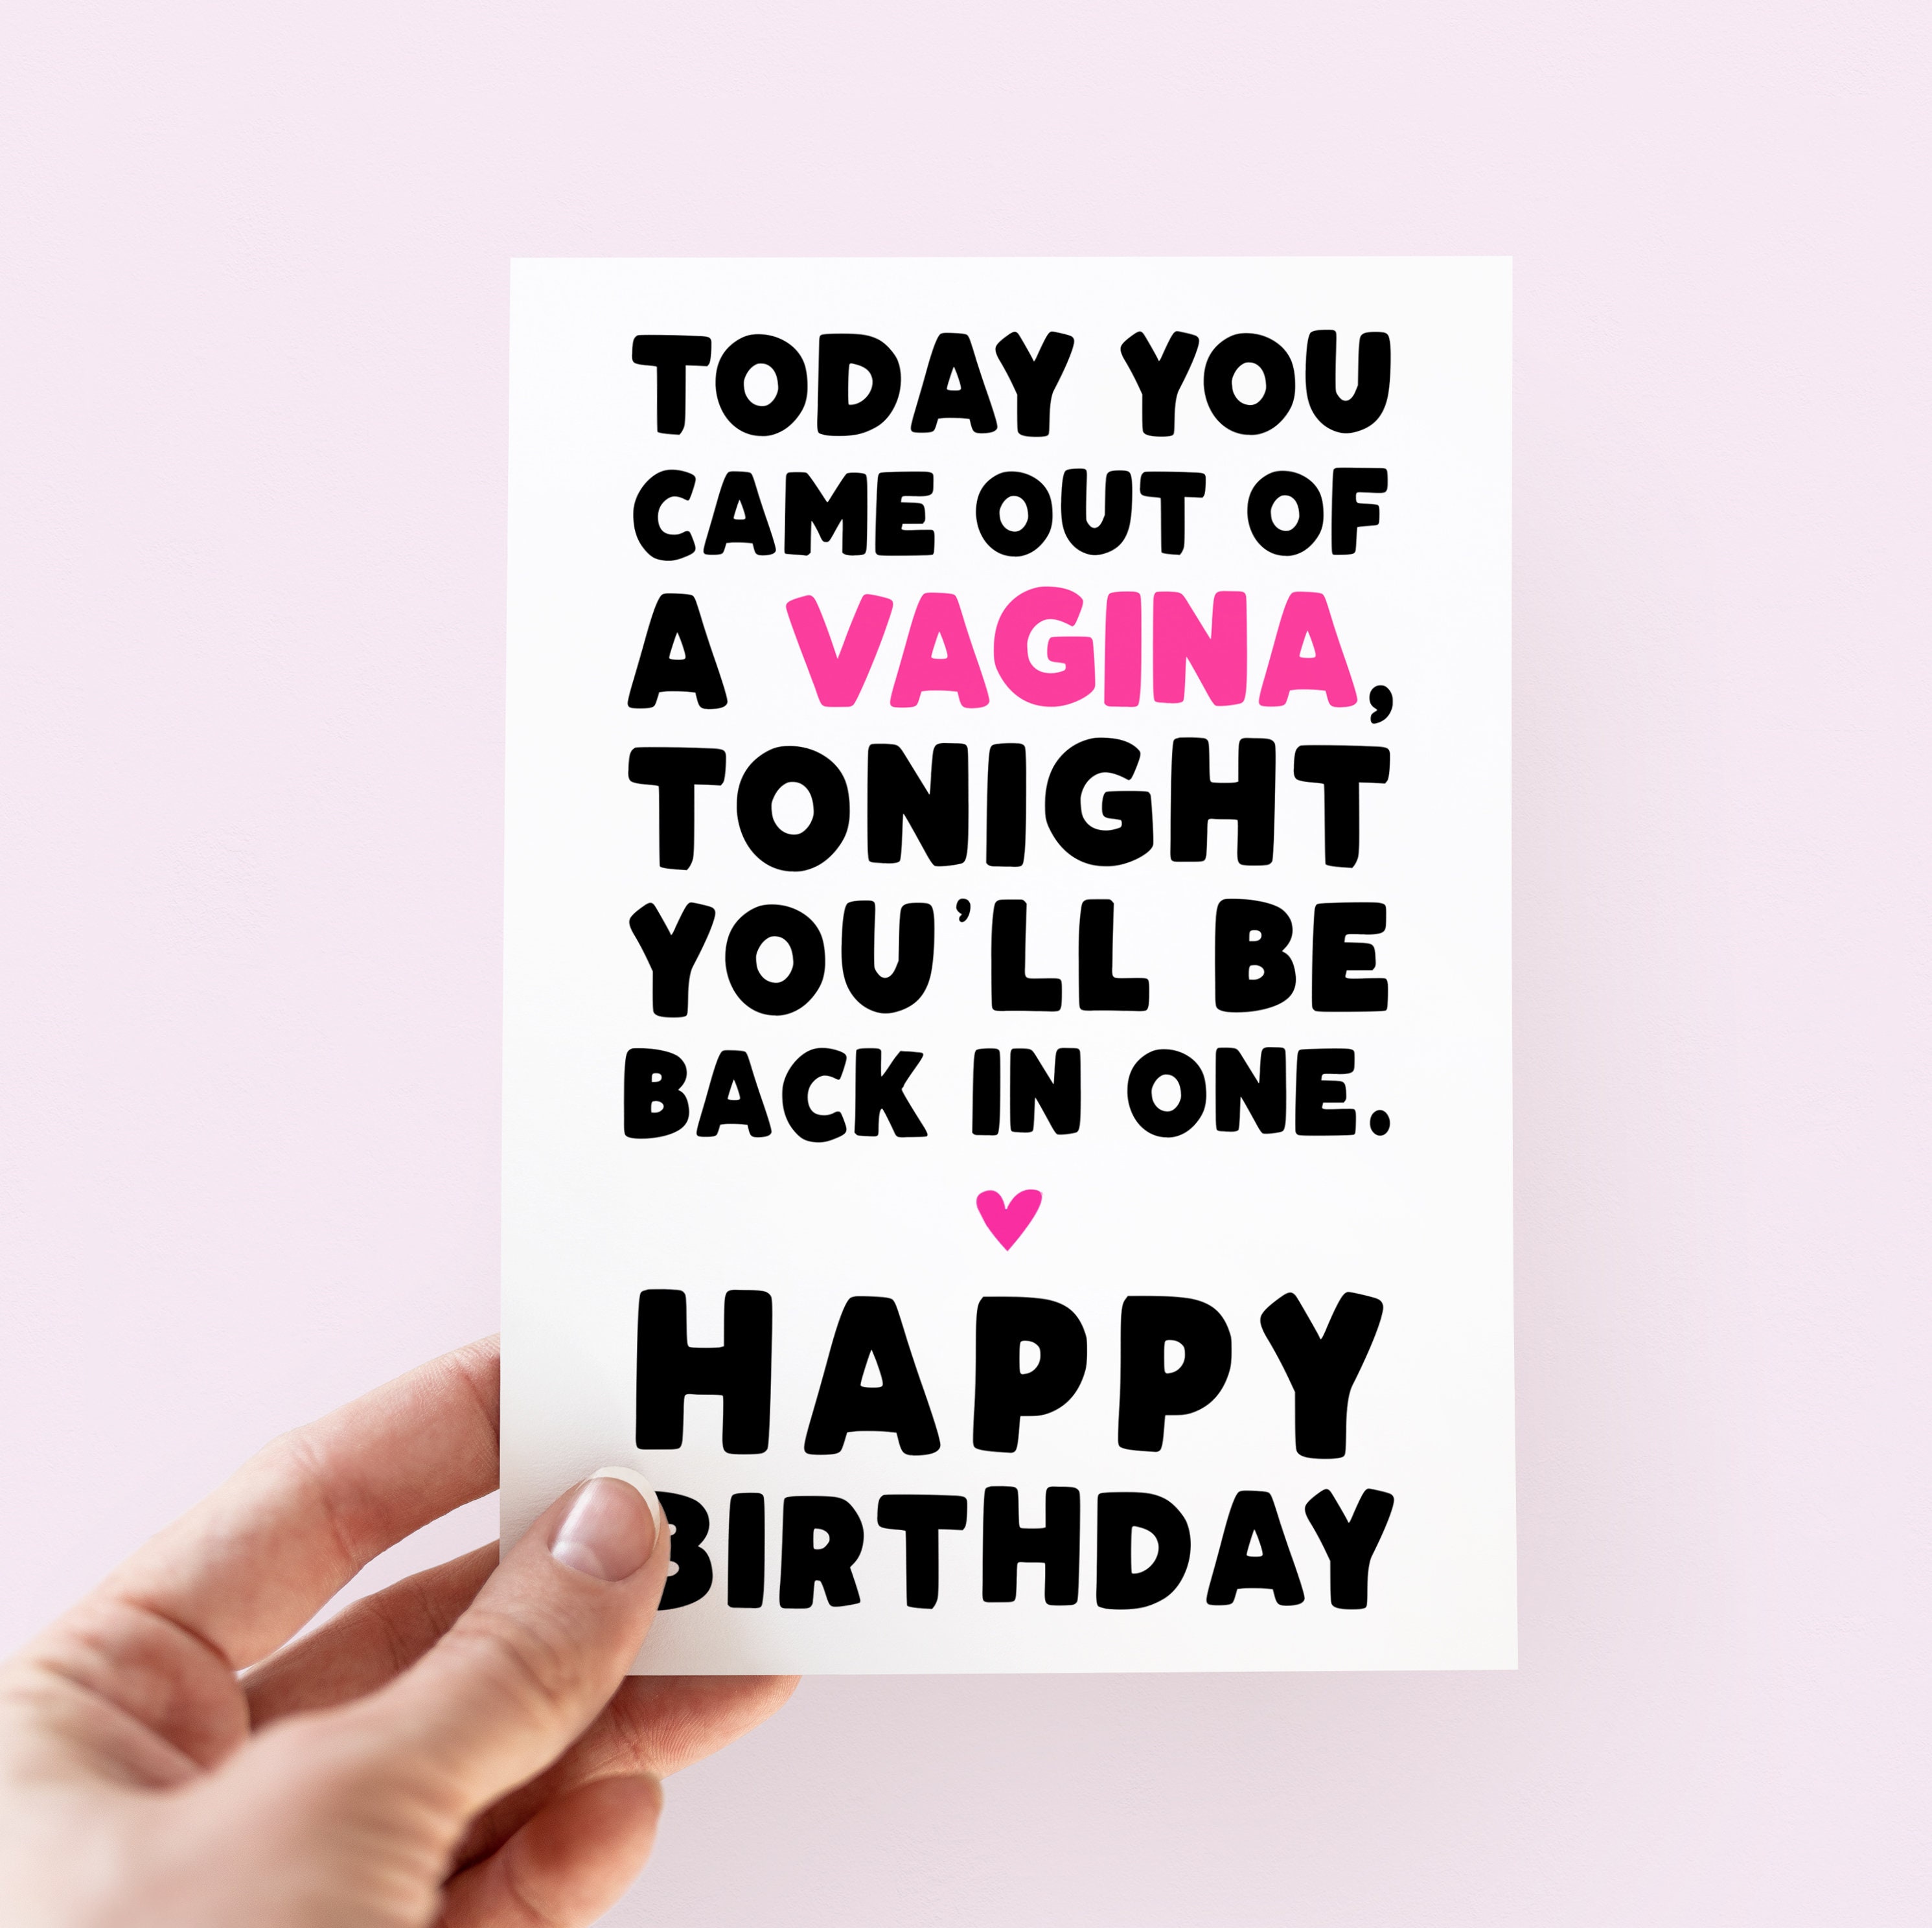 Today You Came Out of A Vagina Birthday Card Funny pic pic